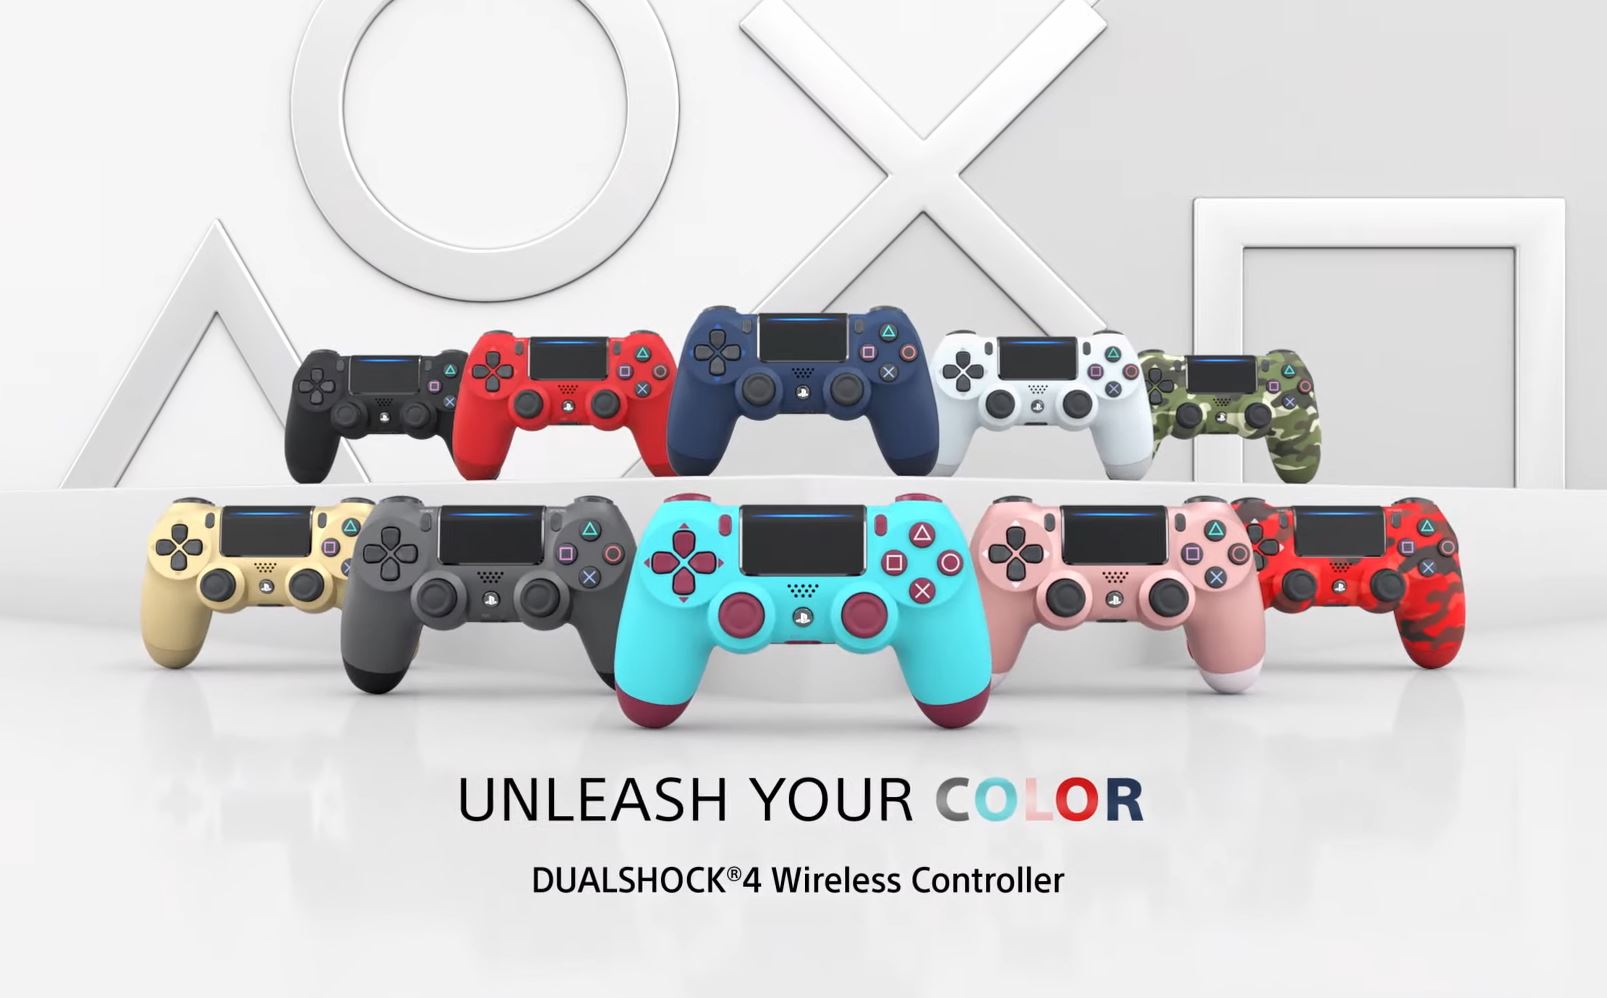 what's a dualshock 4